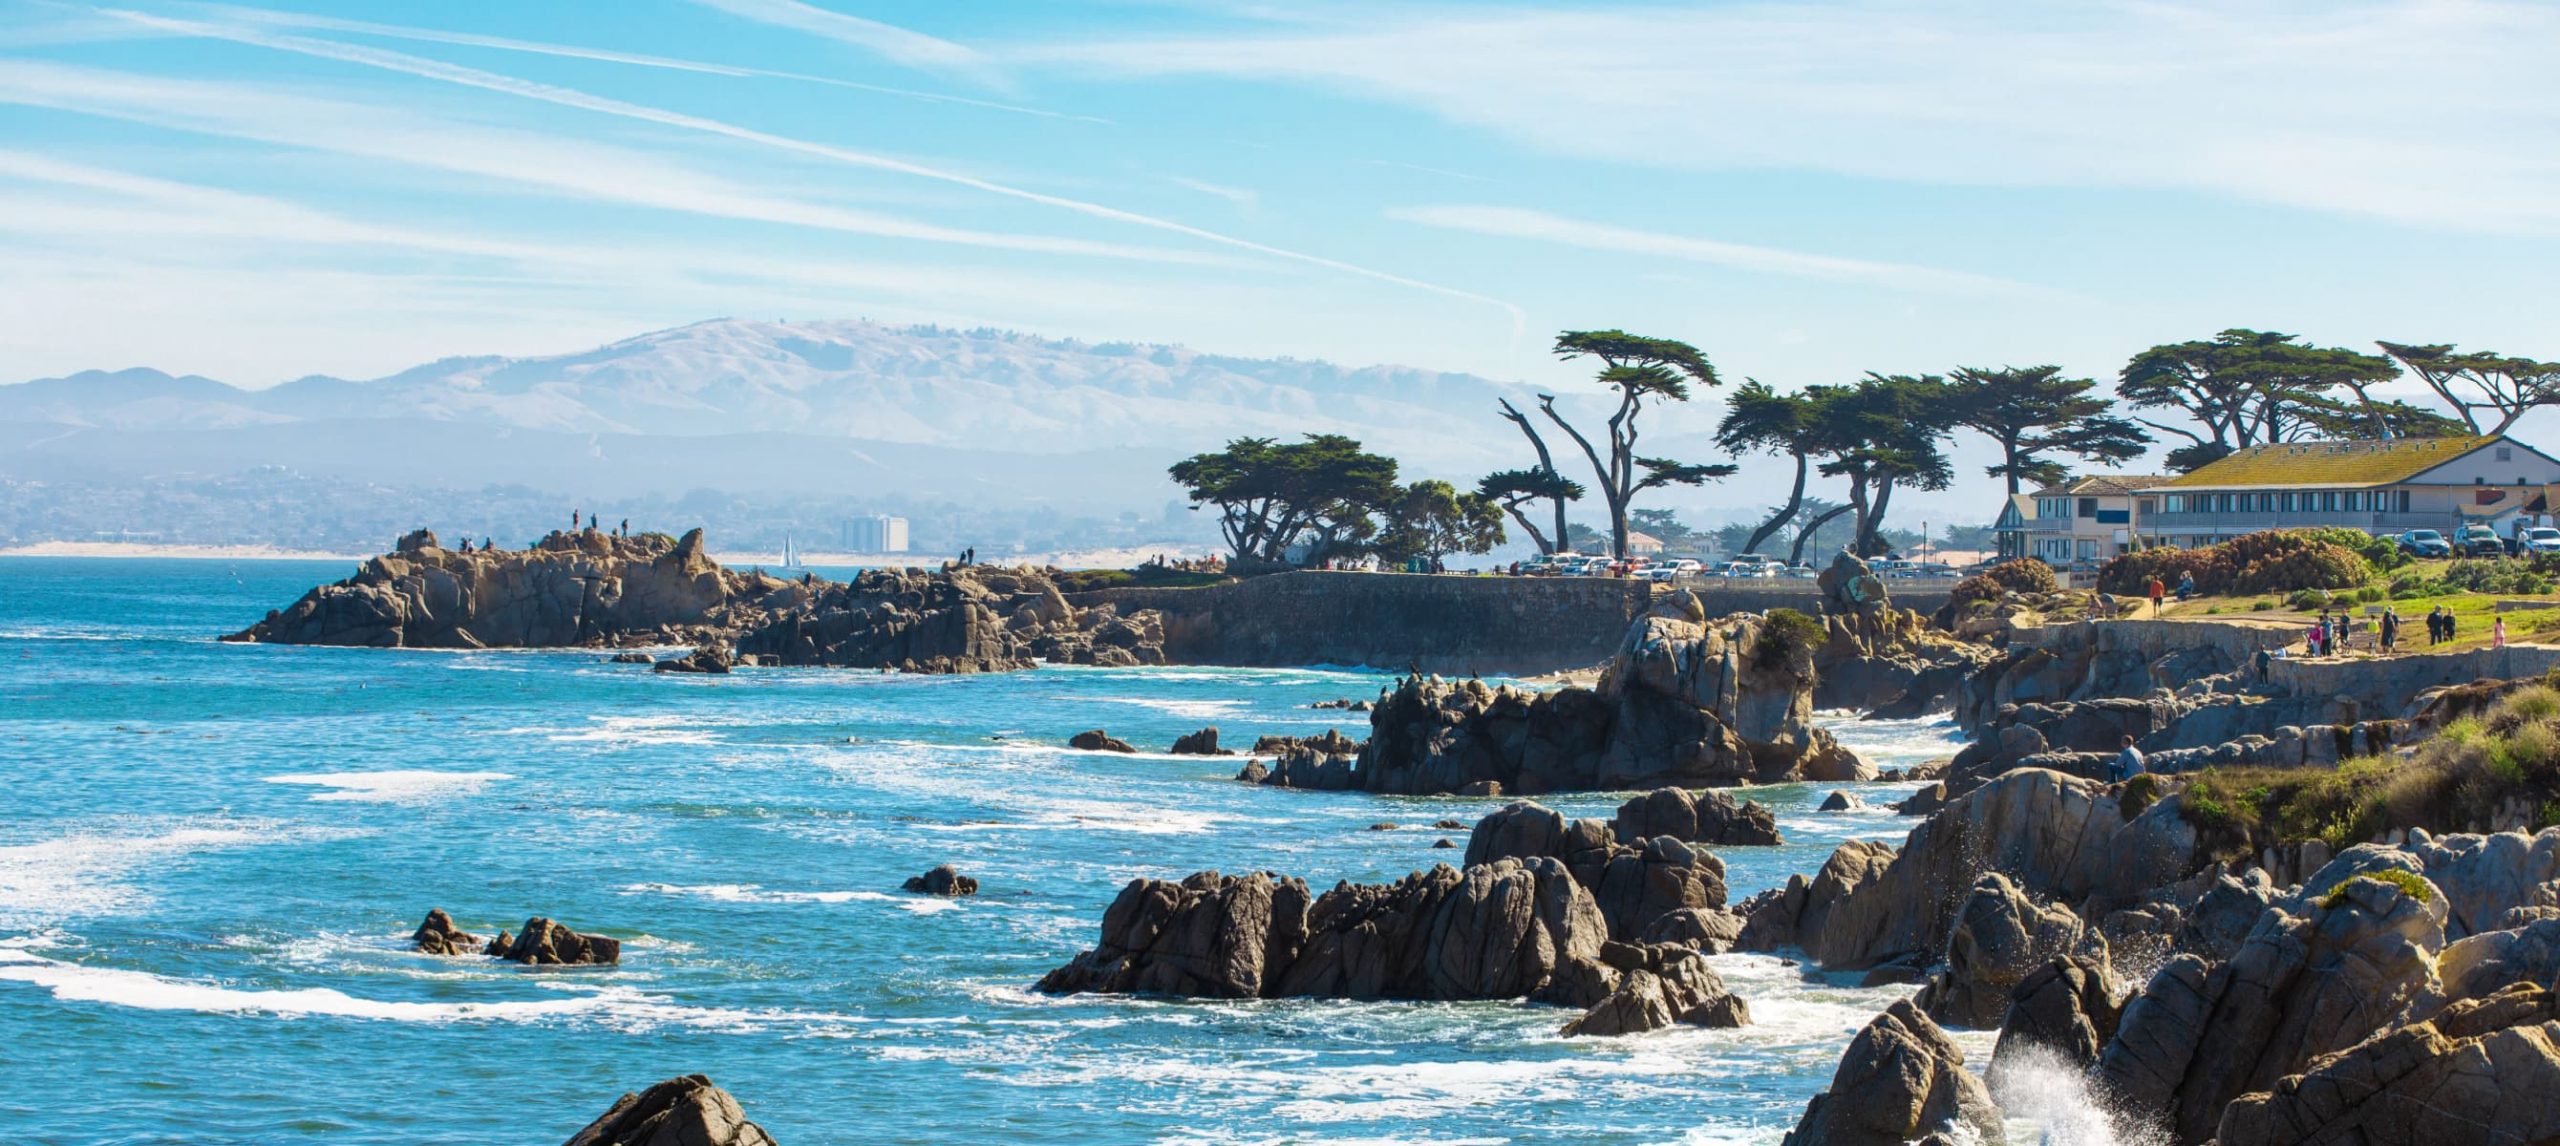 10 Amazing Things to Do in Carmel-by-the-Sea, California